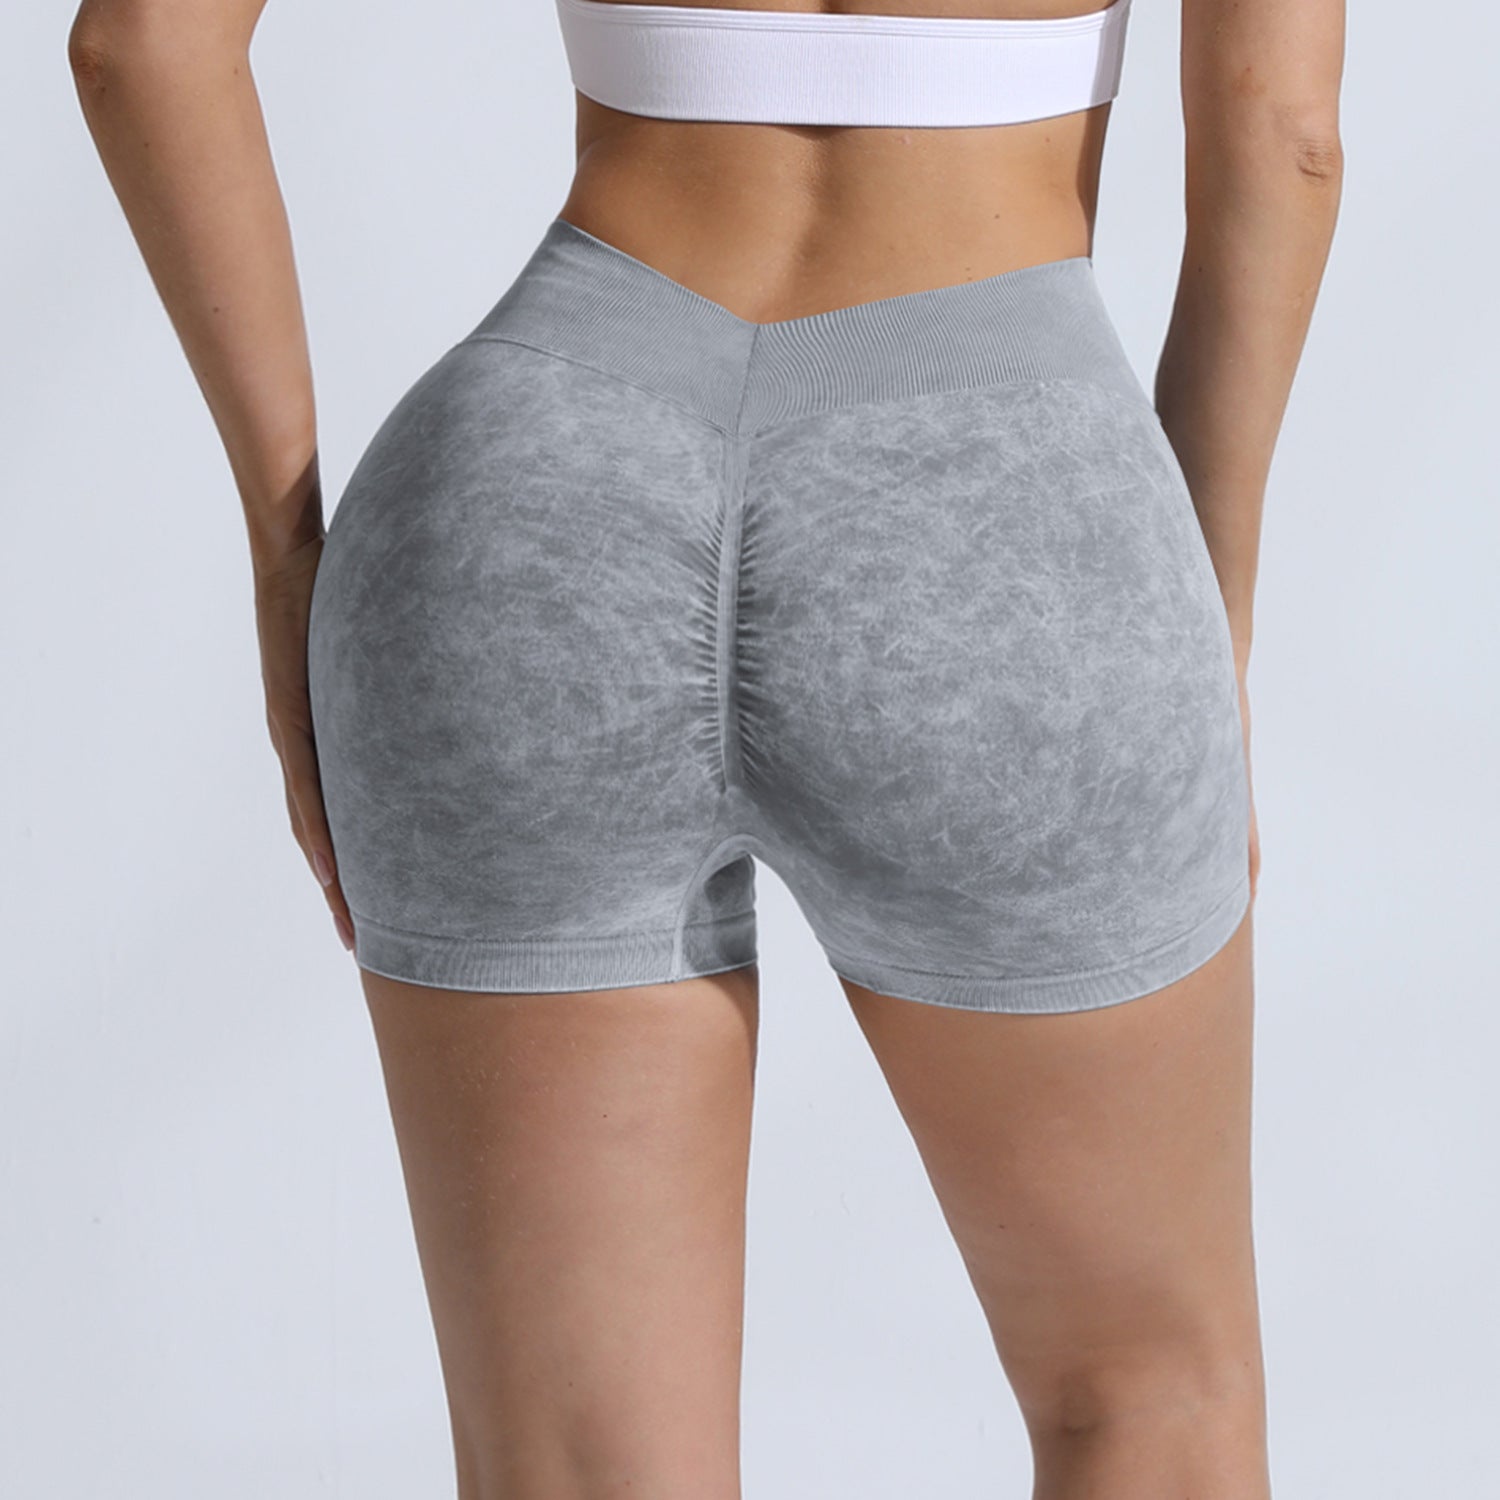 High Waisted Peach Lifting Buttocks Running and Fitness Women's Shorts Sand Washed Yoga Shorts